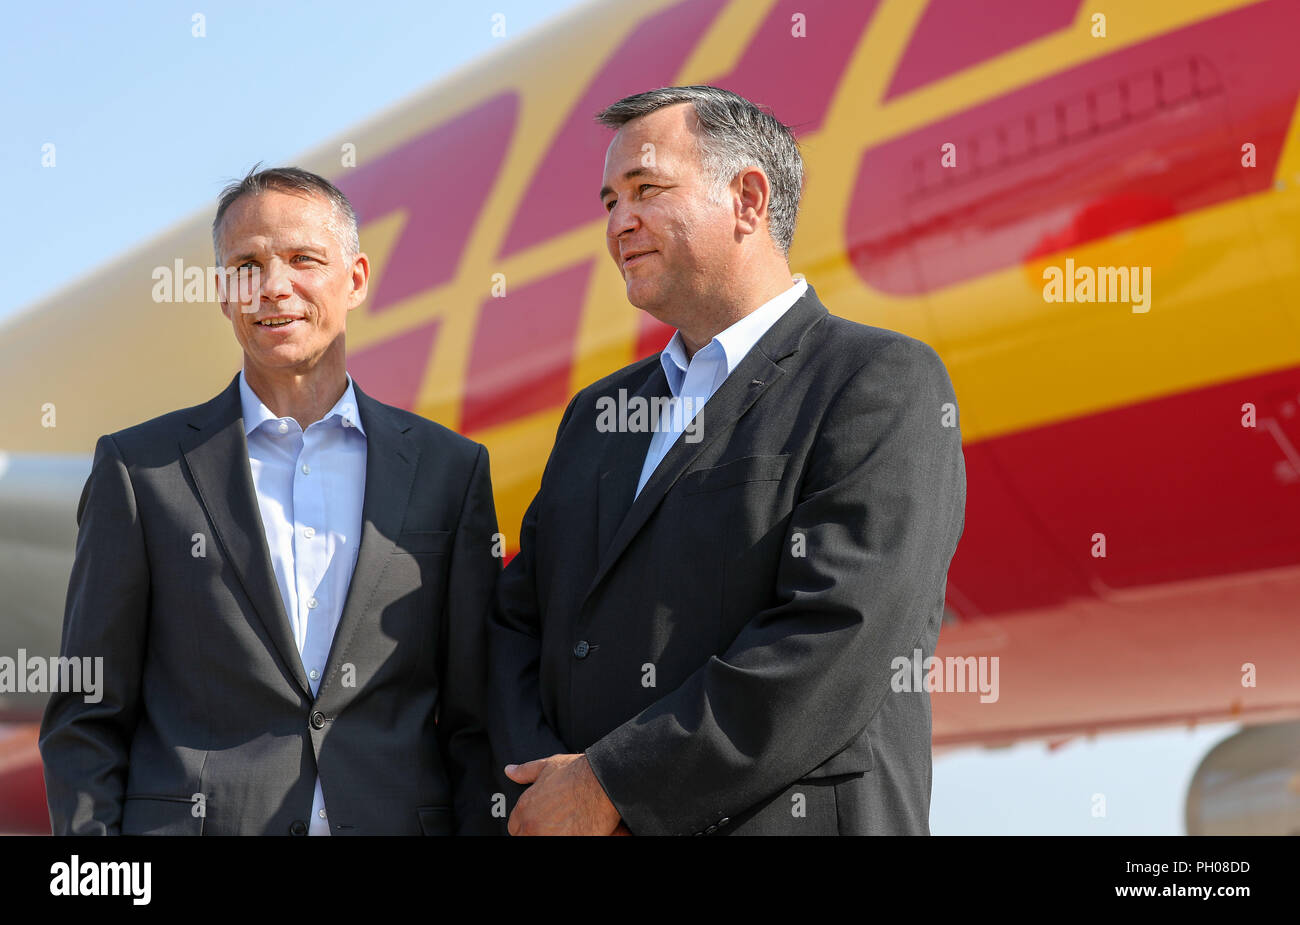 29 August 2018, Germany, Schkeuditz: Ralph Wondrak, CEO of DHL Hub Leipzig (l), and Markus Otto, CEO of European Air Transport Leipzig GmbH, are standing in front of a DHL freighter (Airbus A330 200) at Leipzig/Halle Airport. Ten years ago, the logistics company moved its hub from Brussels to Leipzig. Since then, the volume of air freight has been growing. Almost 1.14 million tons of freight were handled in 2017, an increase of 8.2 percent over the previous year. Up to 65 machines for DHL alone are in operation at the airport on working days. Photo: Jan Woitas/dpa-Zentralbild/dpa Stock Photo